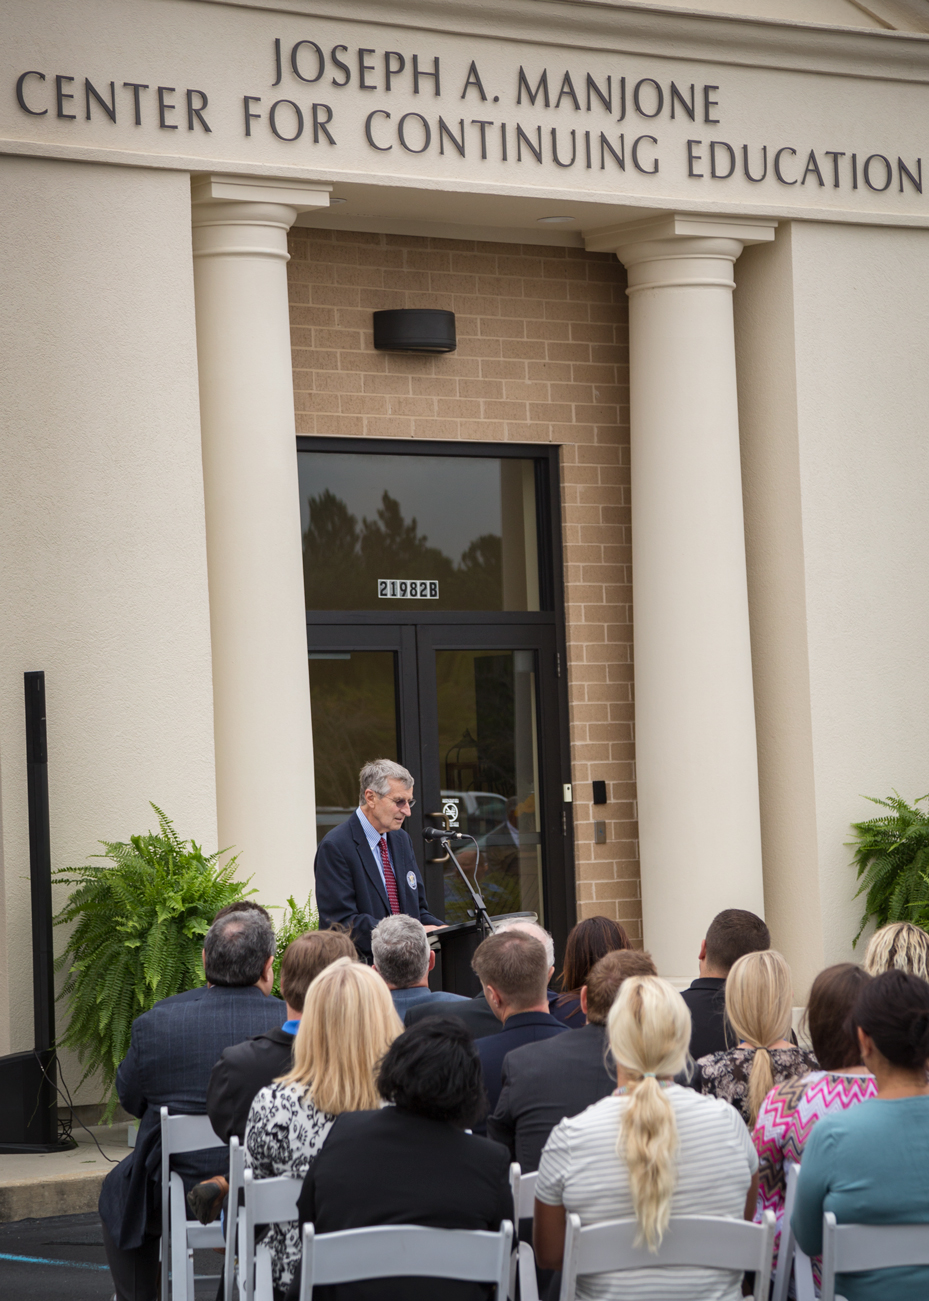 Joseph A. Manjone speaks at ceremony in front of the building now bearing his name on Monday in Orange Beach, Alabama.